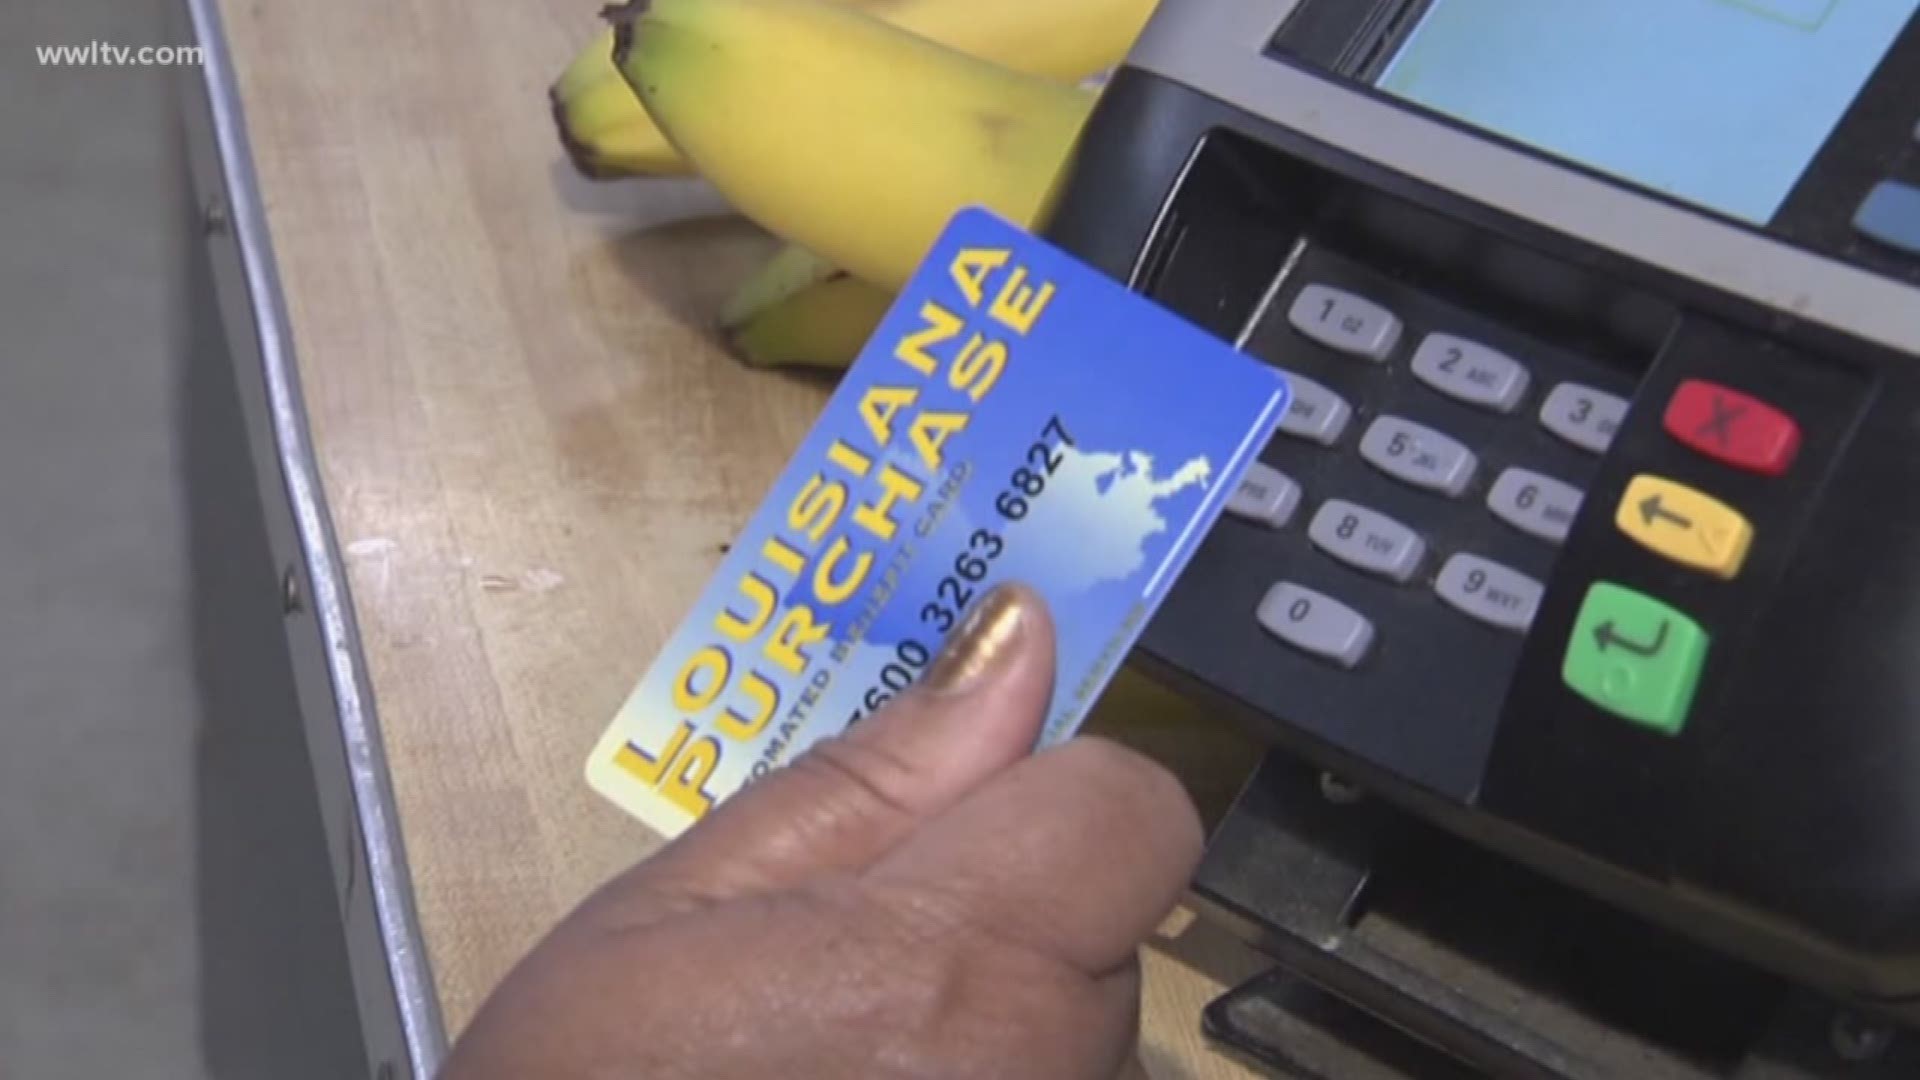 louisiana food stamps application